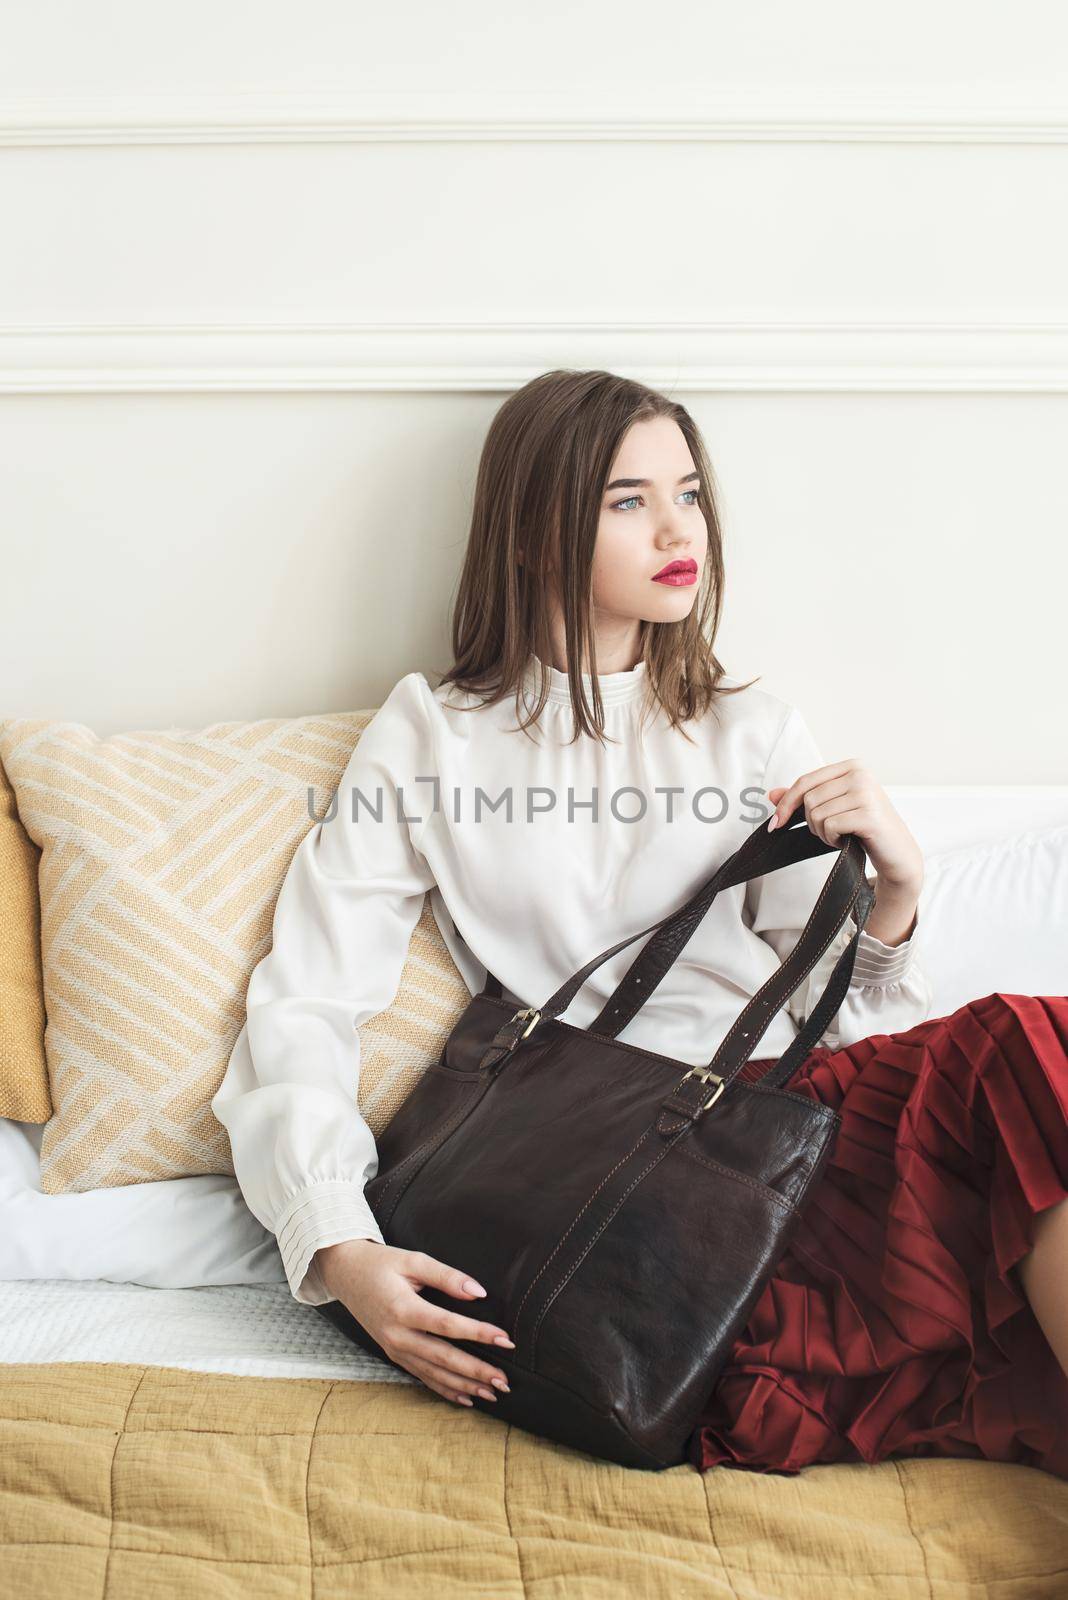 Portrait of fashionable women in red skirt, white blouse posing in a bed by Ashtray25